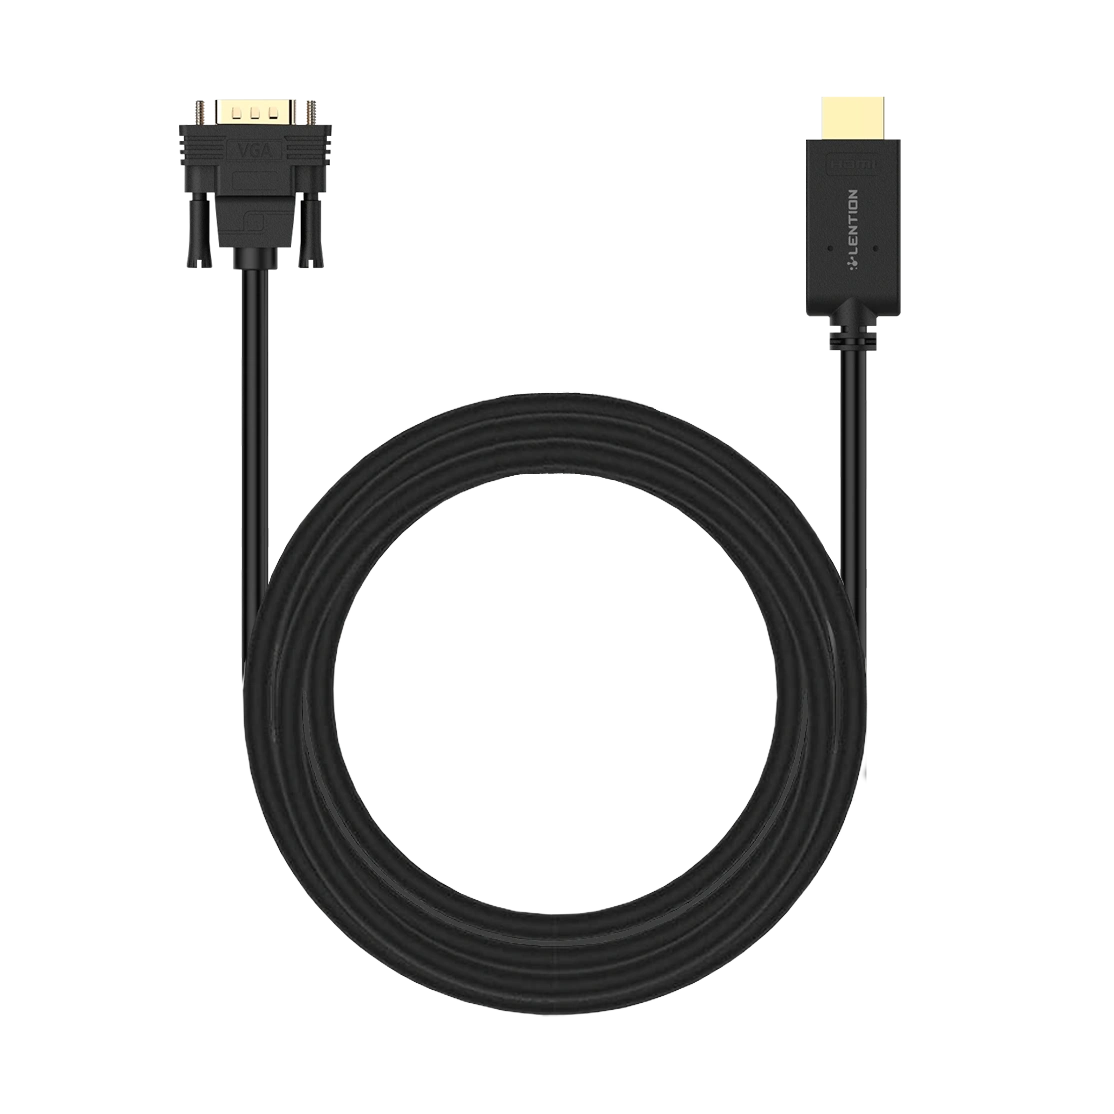 Lention HDMI to VGA Cable 1.8m CB-HV-1.8M